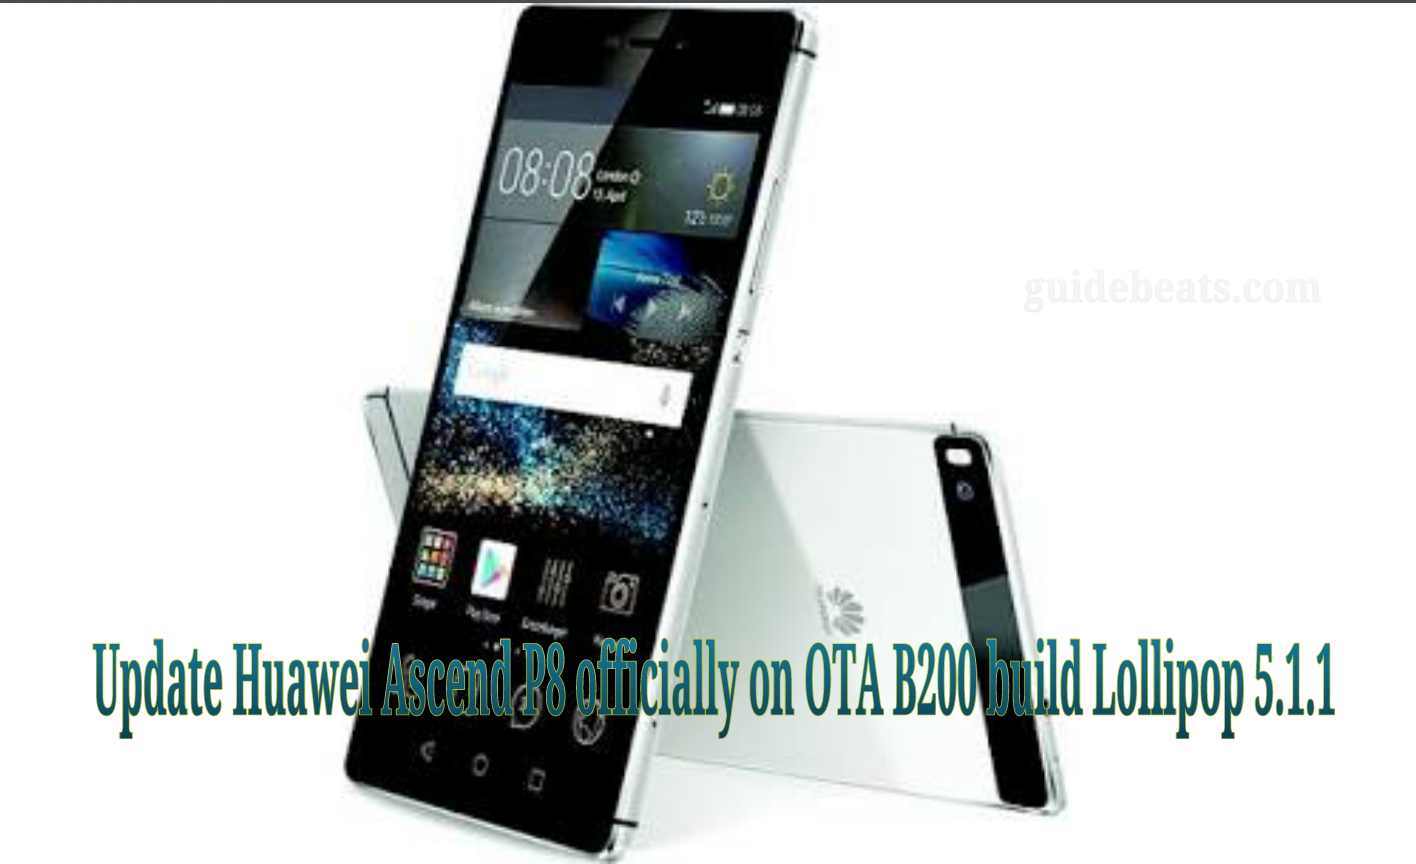 update Huawei Ascend P8 officially